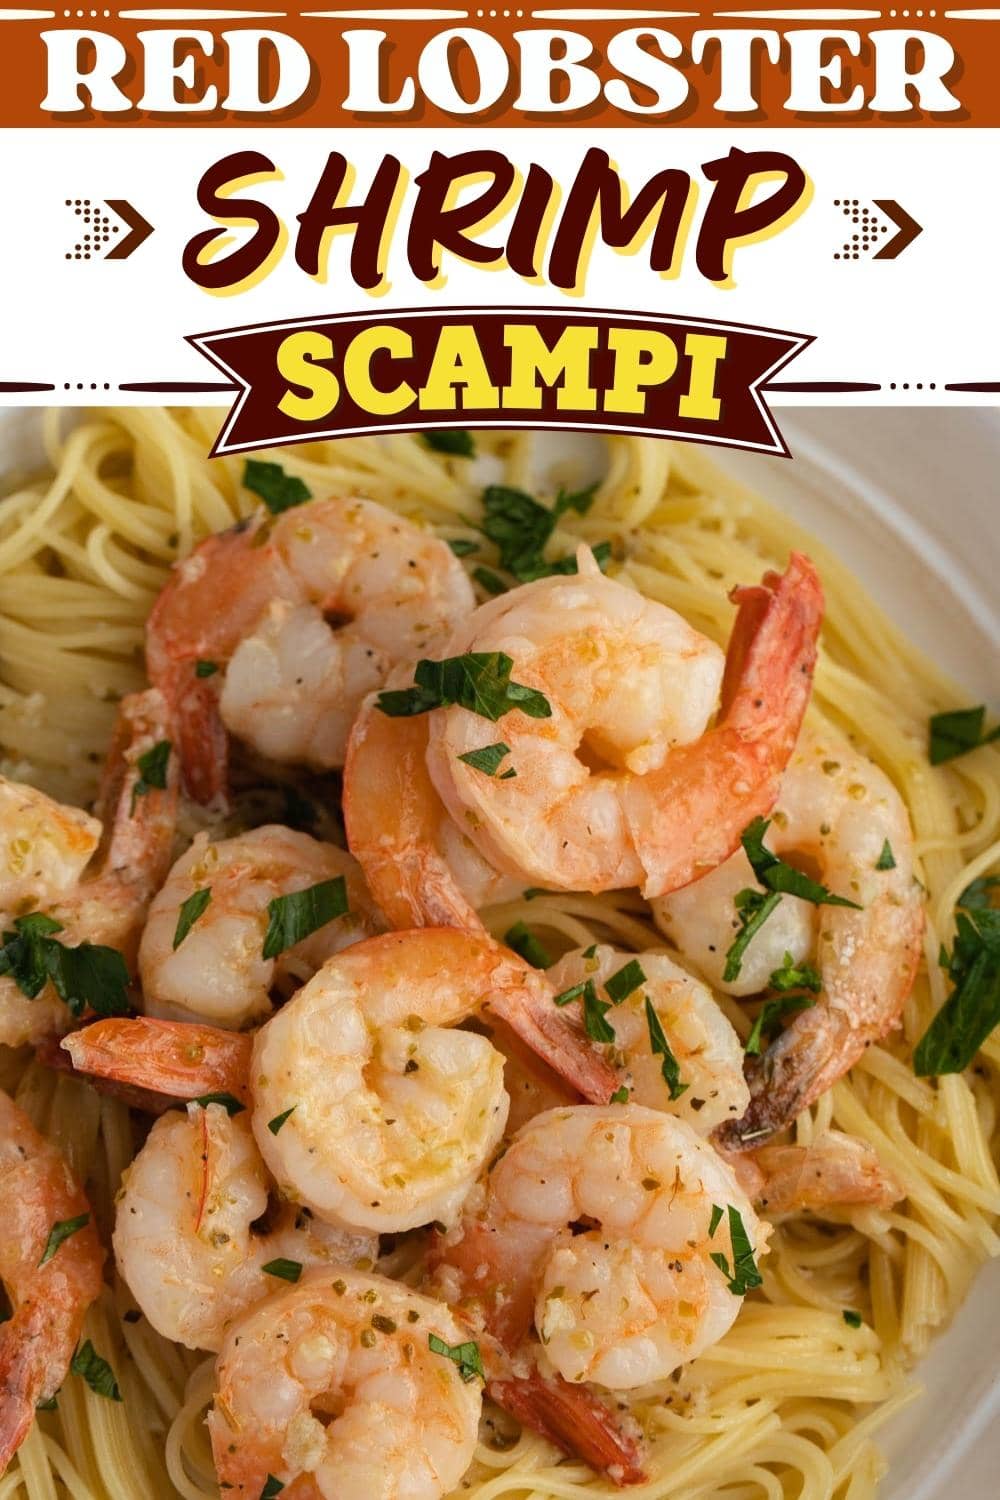 Pasta Topped With Red Lobster Shrimp Scampi, Garnished With Chopped Parsley Leaves